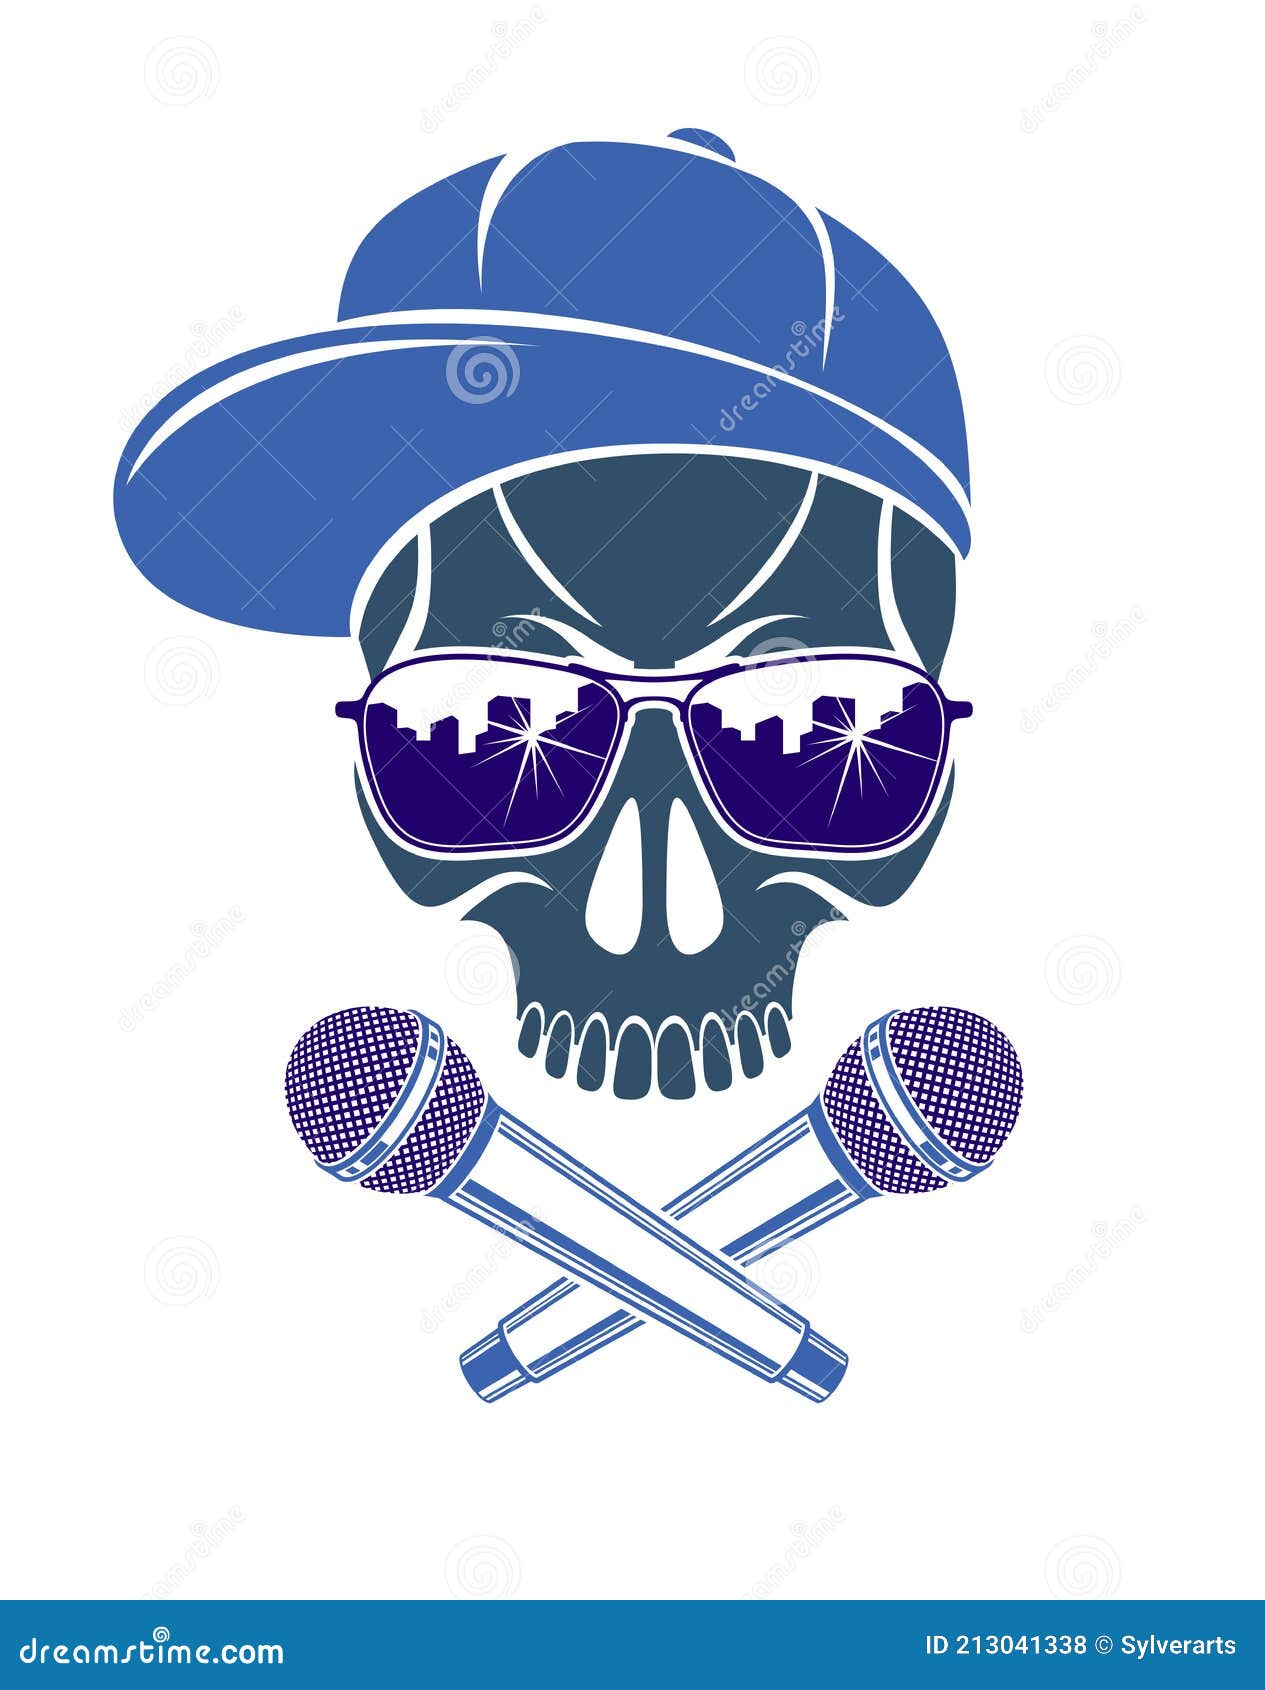 Rap music logo or emblem with microphone Vector Image